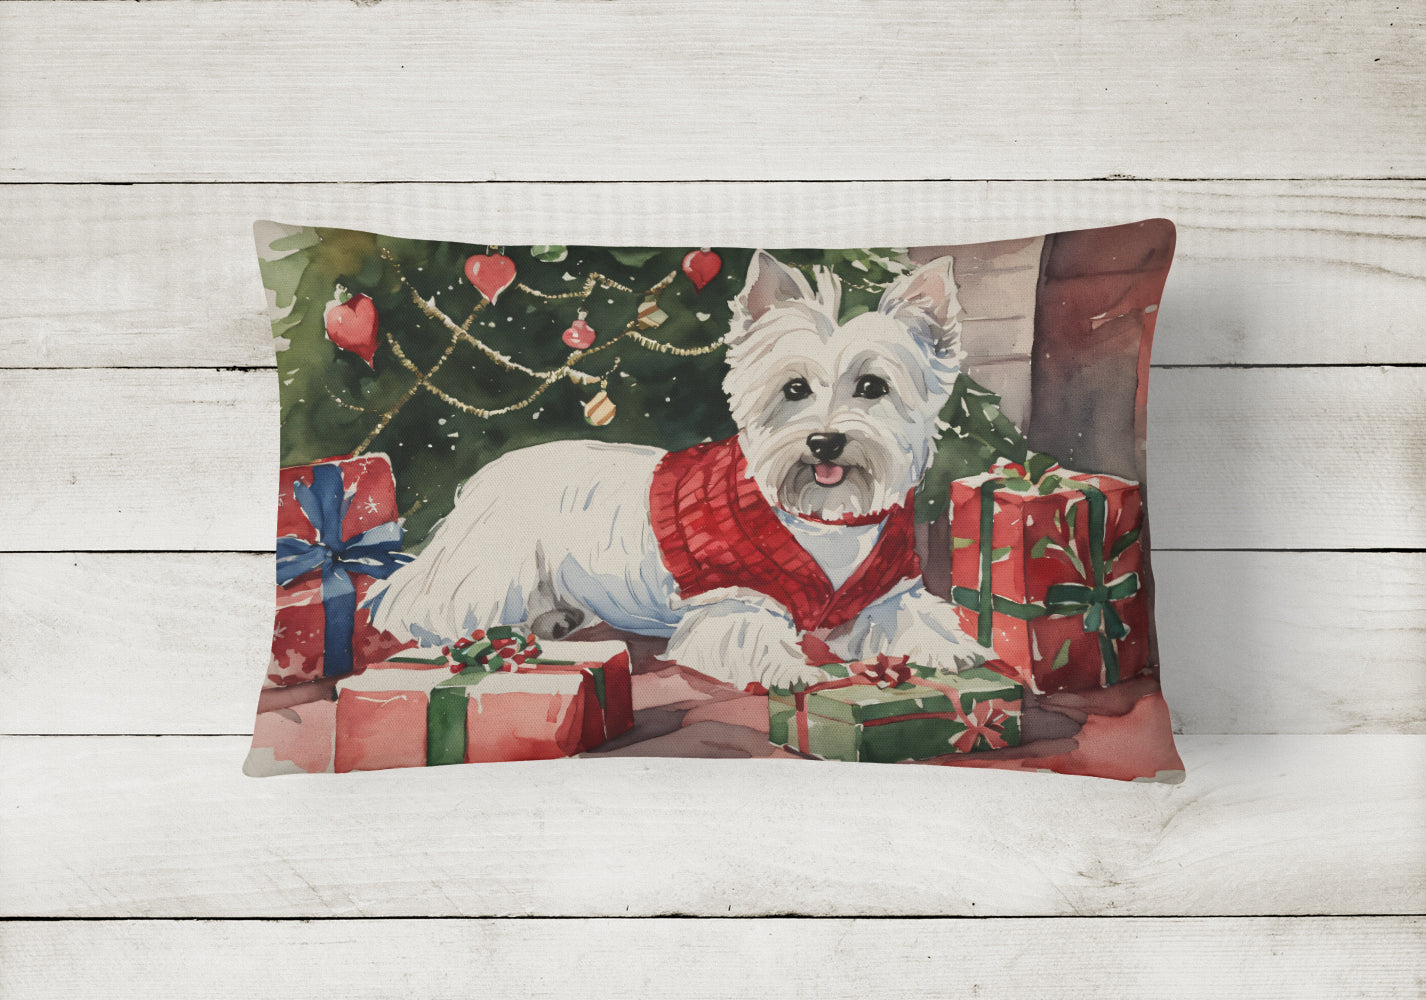 Buy this Westie Christmas Fabric Decorative Pillow